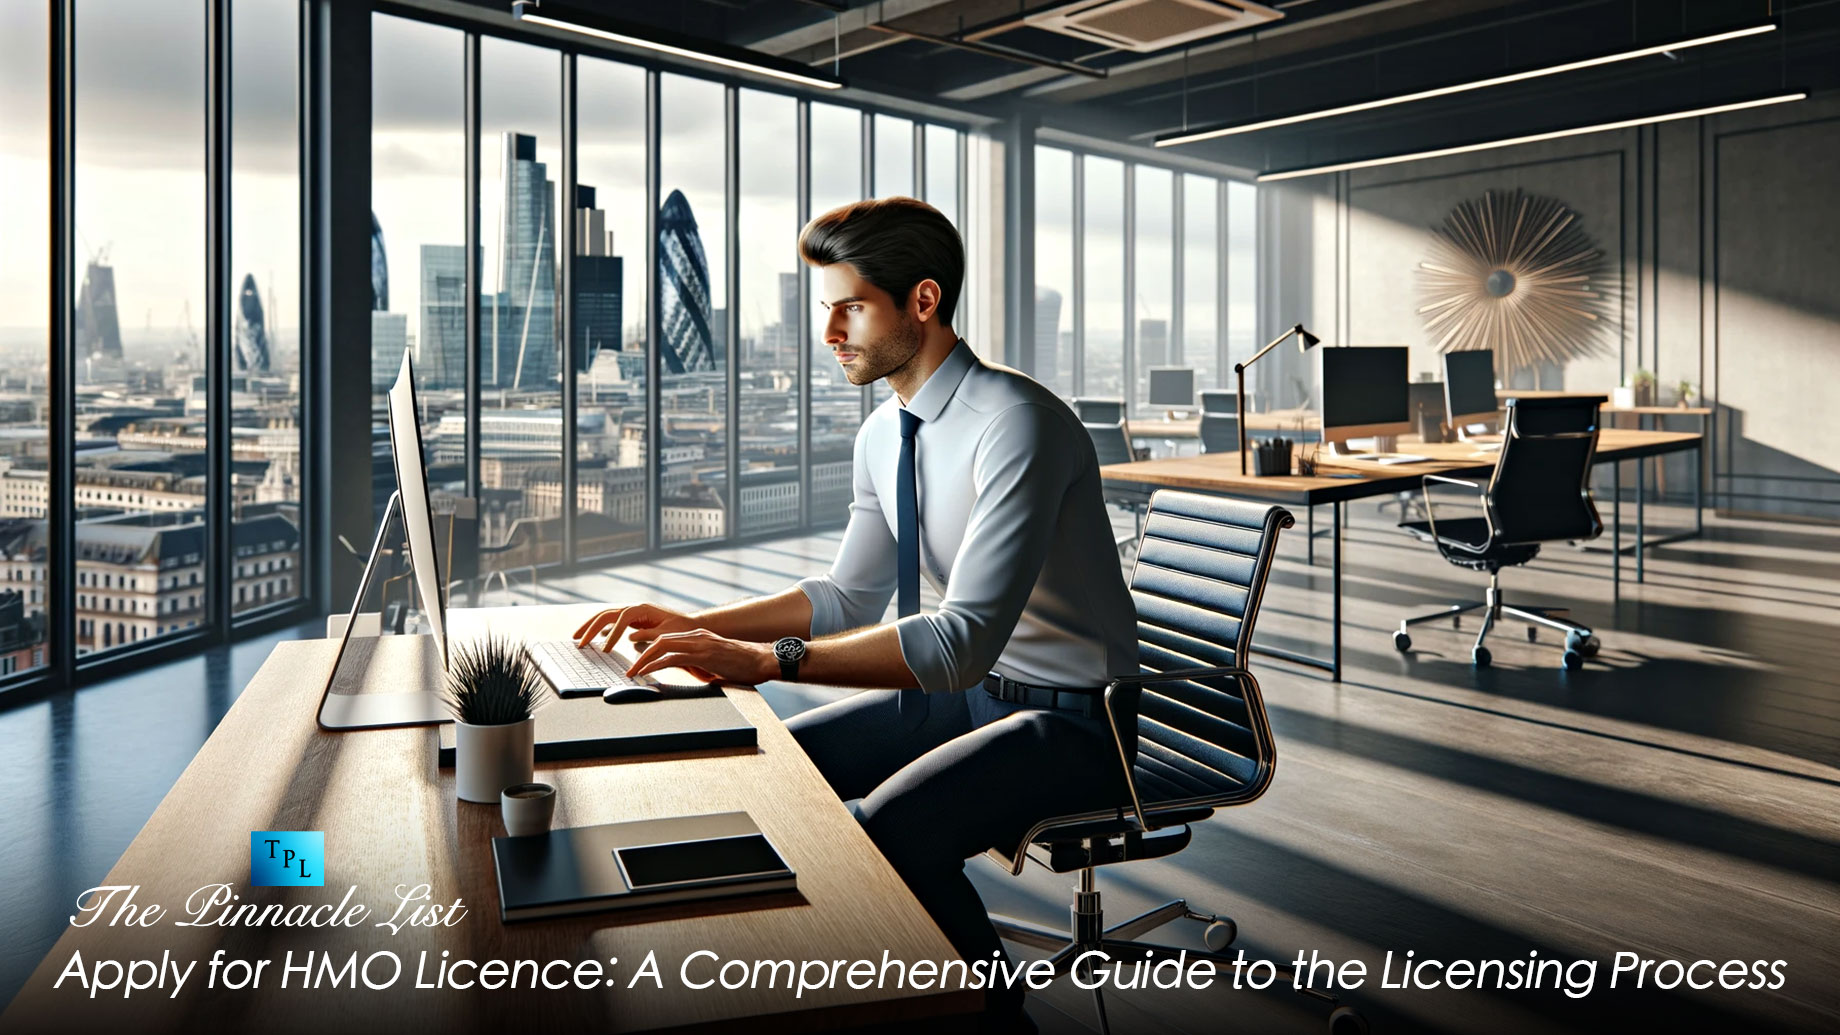 Apply for HMO Licence: A Comprehensive Guide to the Licensing Process